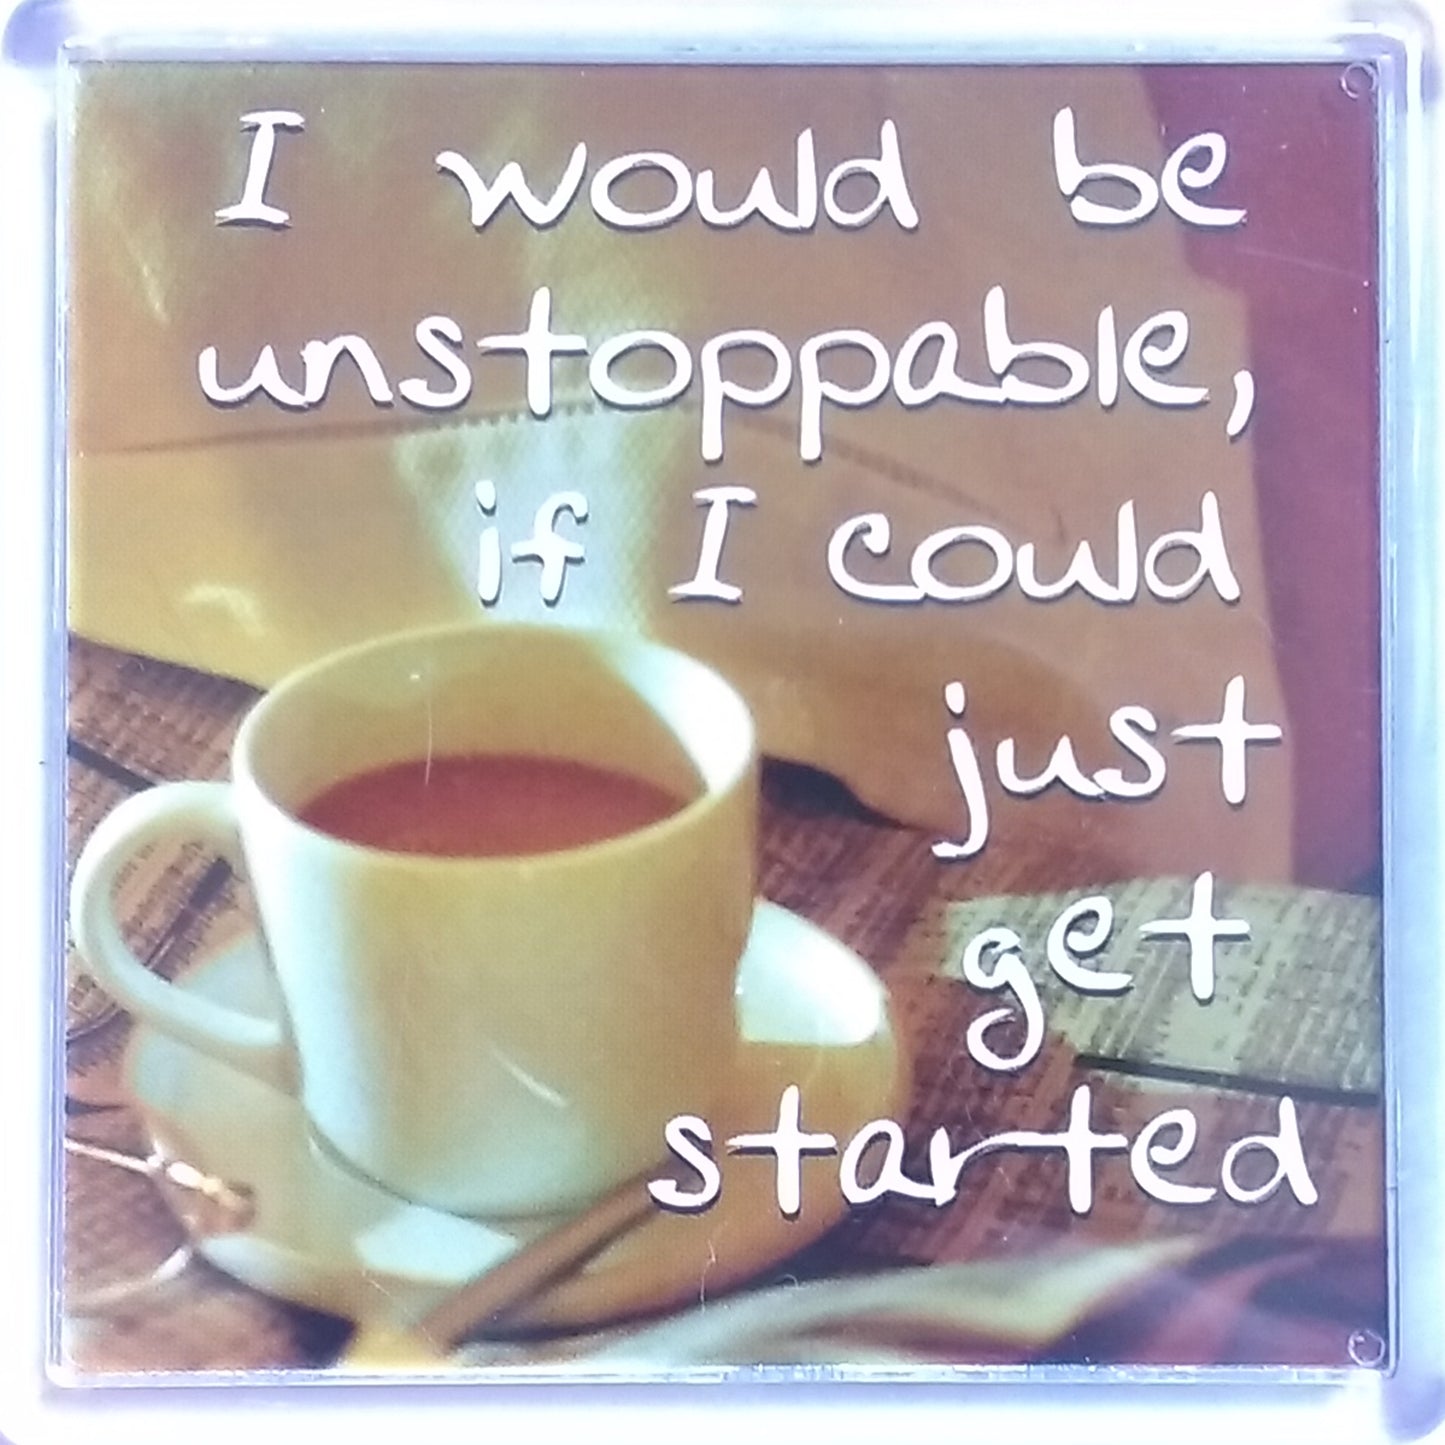 History & Heraldry Sentiment Fridge Magnet "I would be unstoppable if I could just get started"